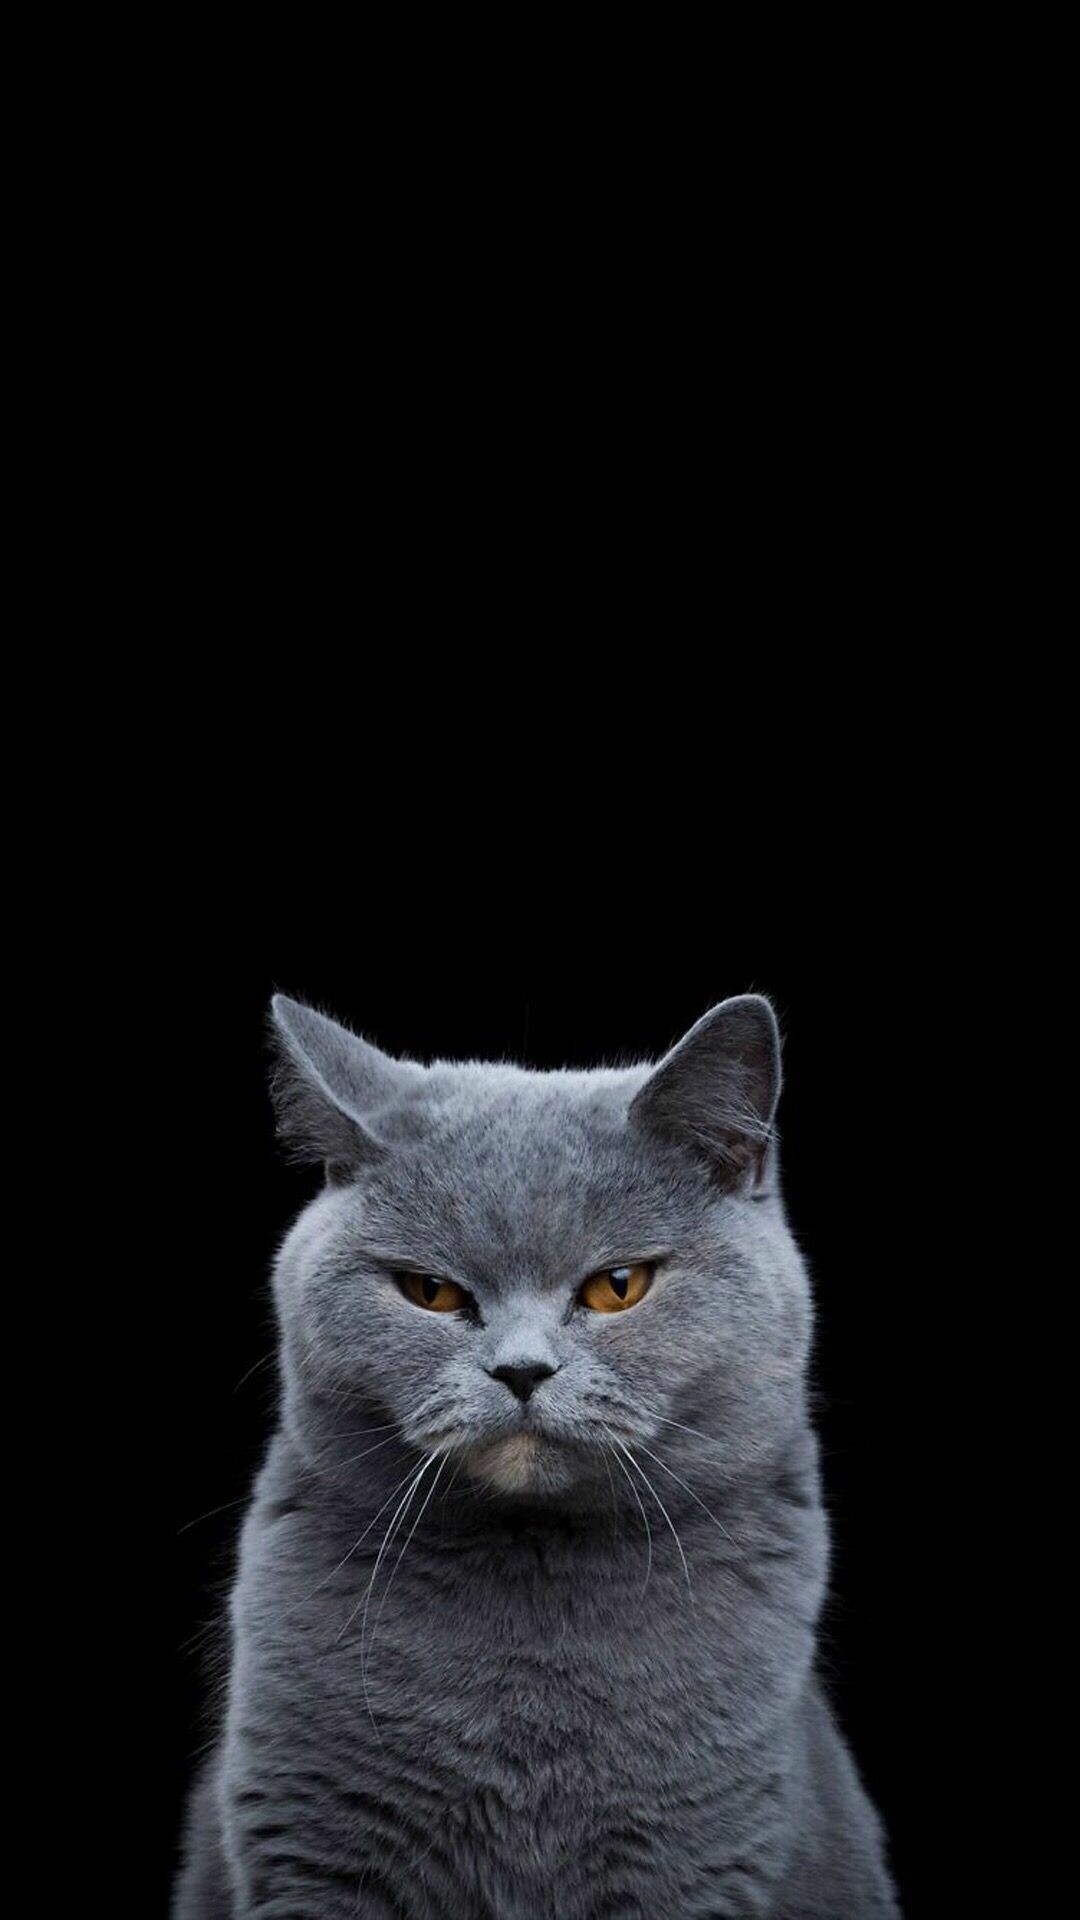 British Cat: The oldest natural English breed. 1080x1920 Full HD Wallpaper.